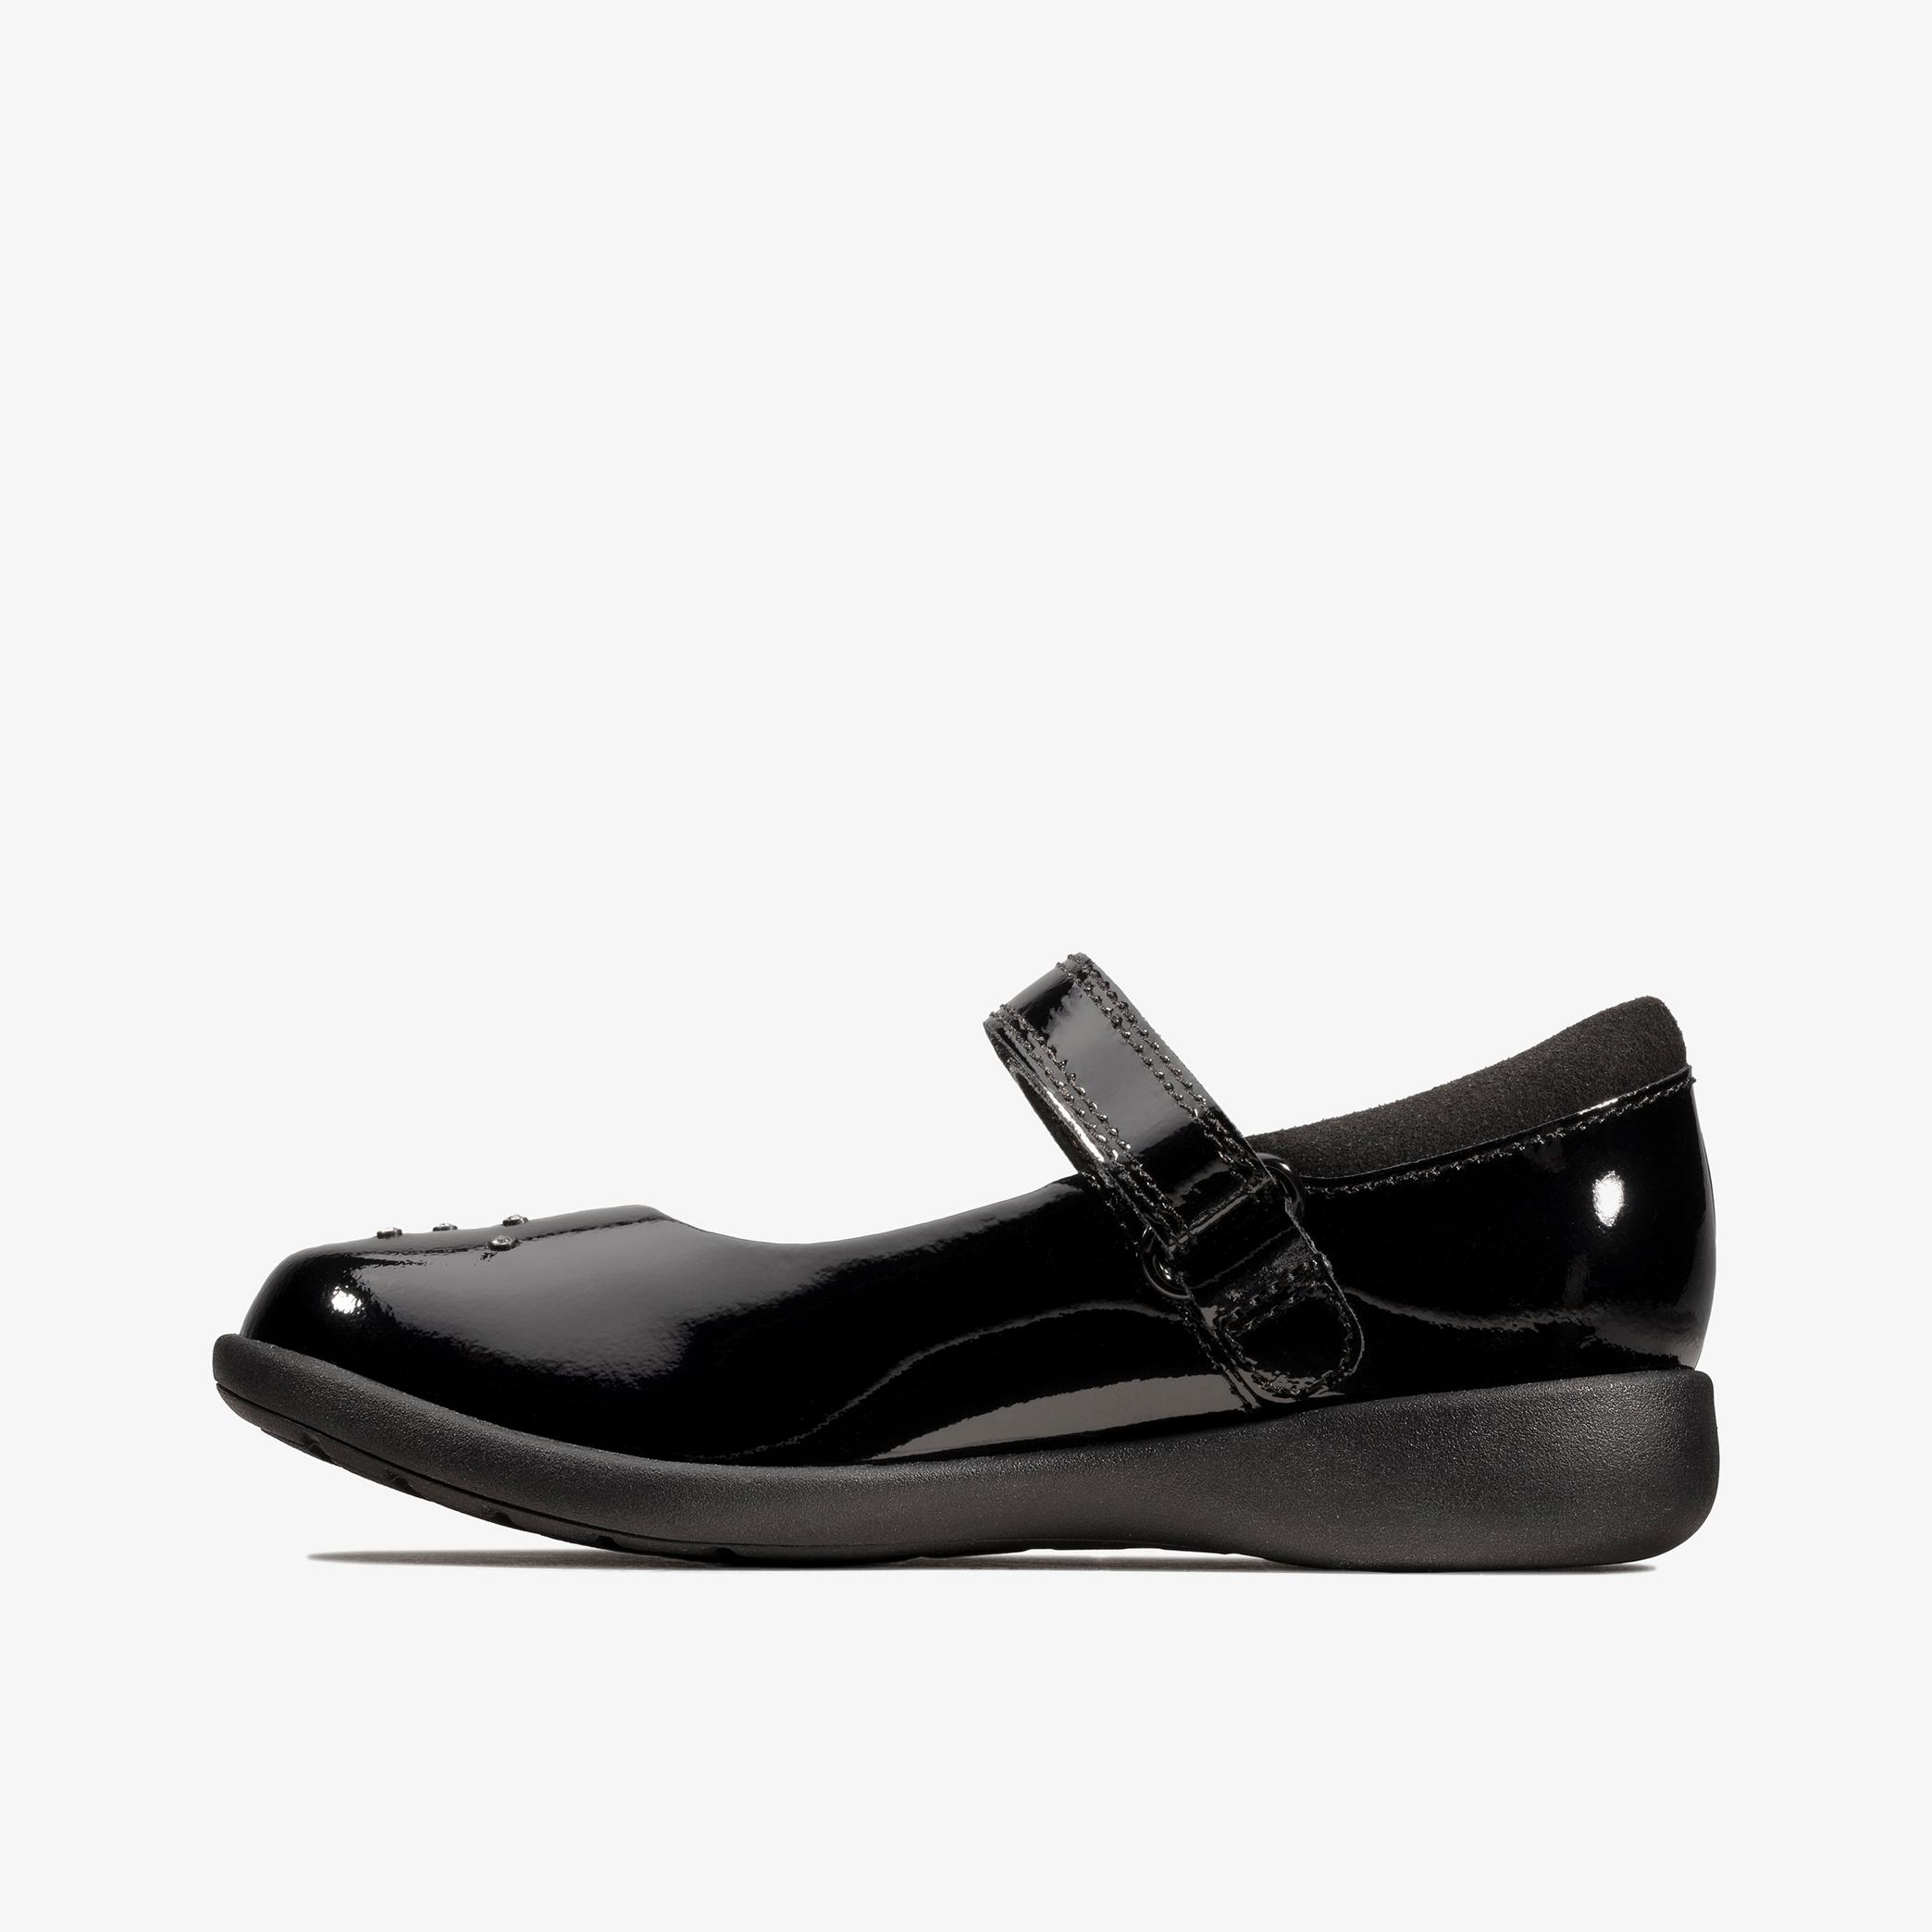 GIRLS Etch Spark Kid Black Patent Mary Jane Shoes | Clarks Outlet